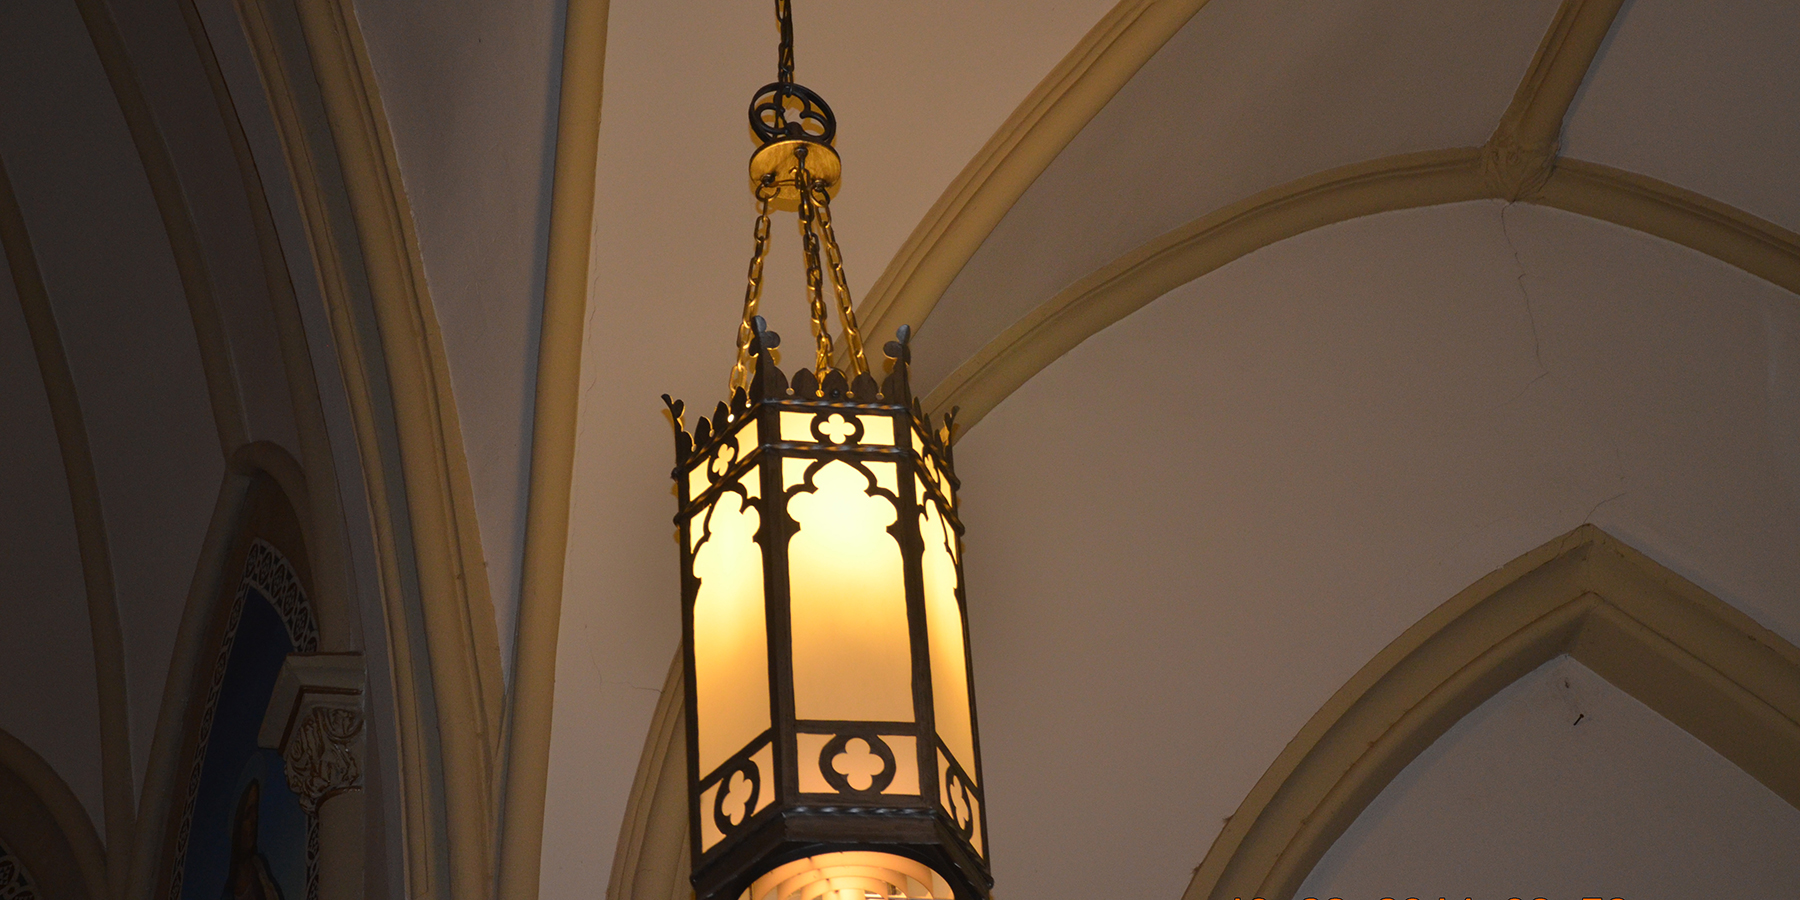 One of the ornamented lamps at St. Francis